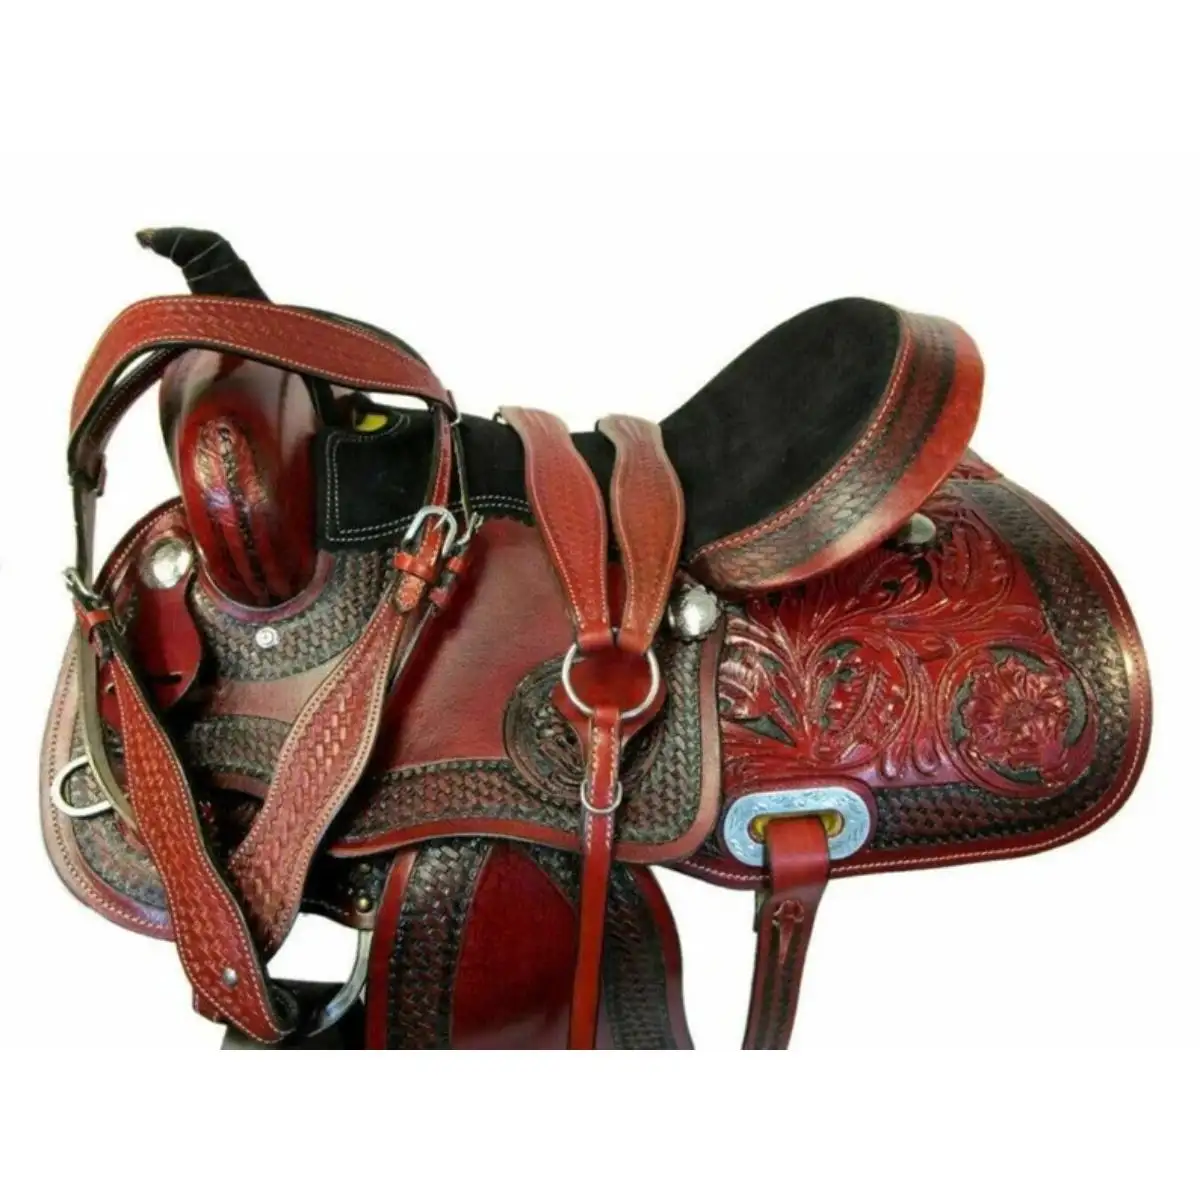 New Leather Barrel Racing Pleasure Trail Leather Western Horse Saddle Equestrian with Tack Set Size from Indian Exporter